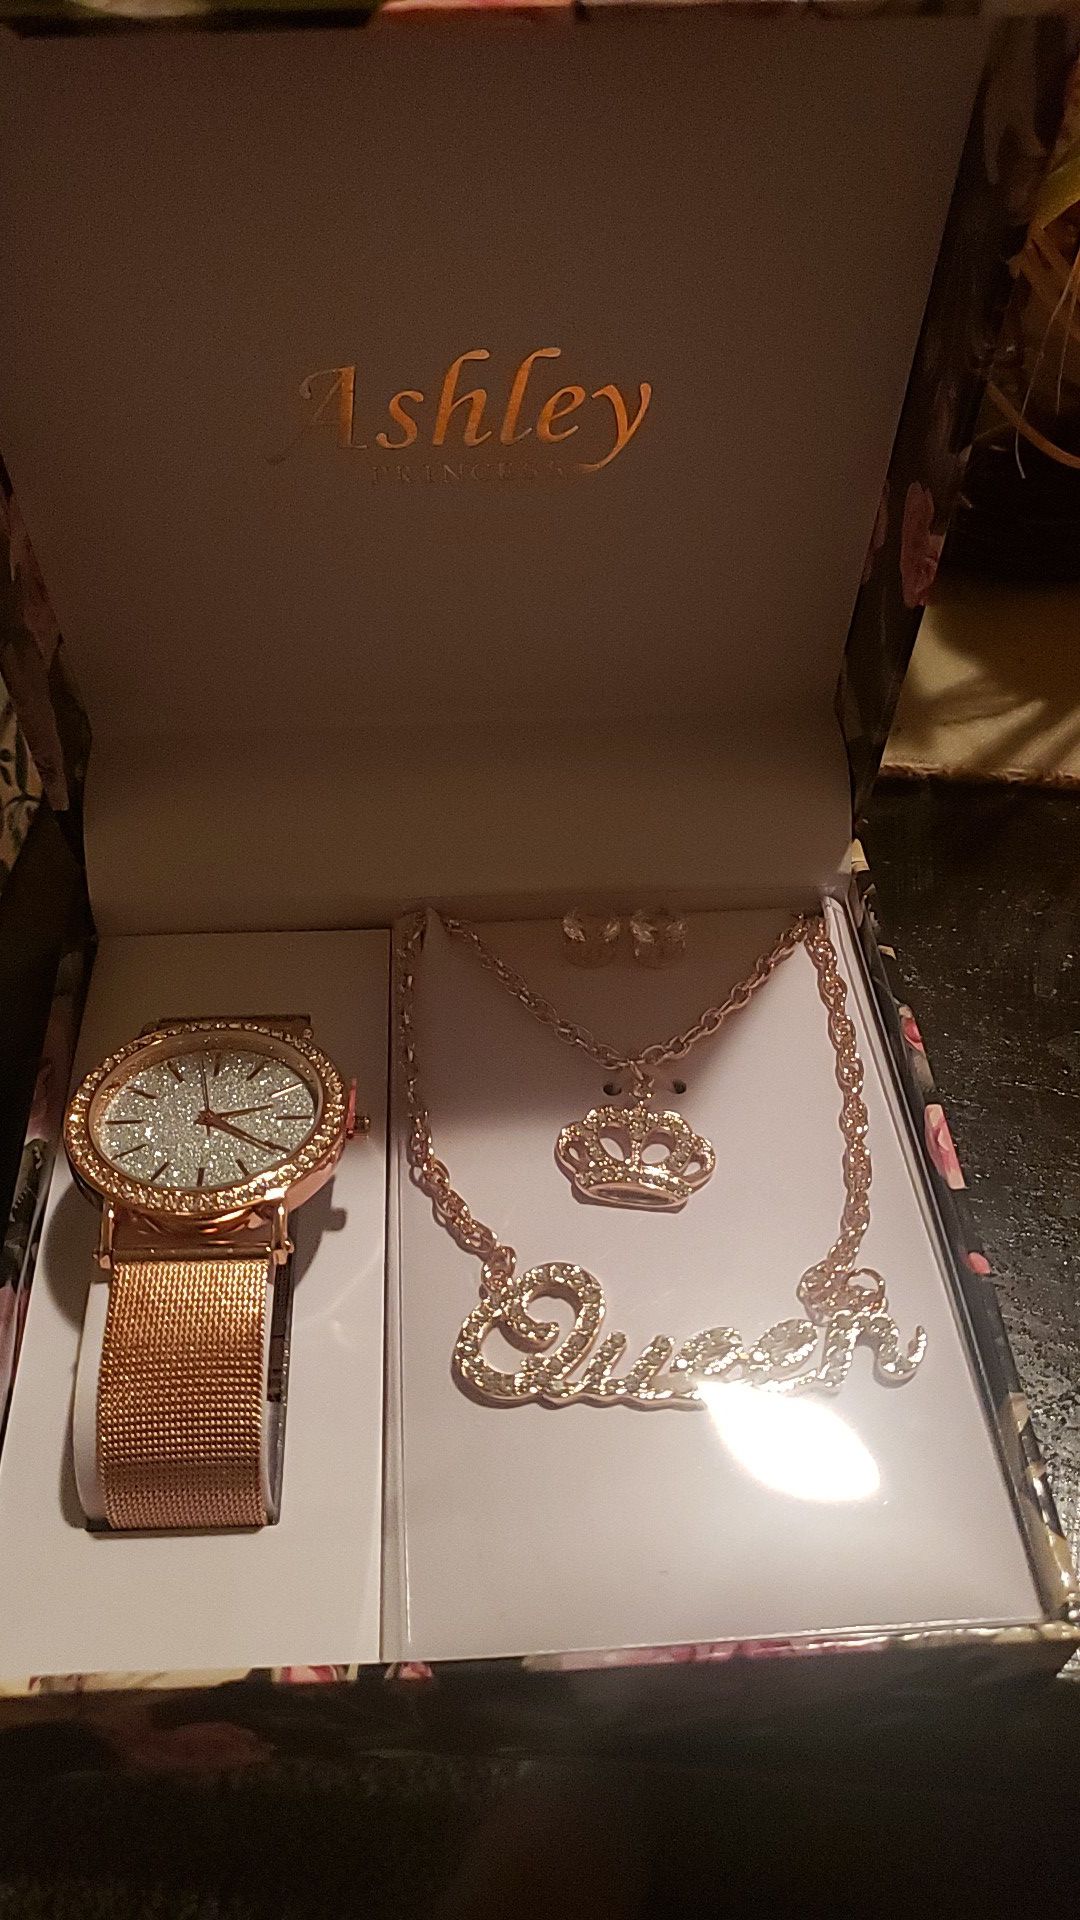 Watch,necklace,and earring Queen set